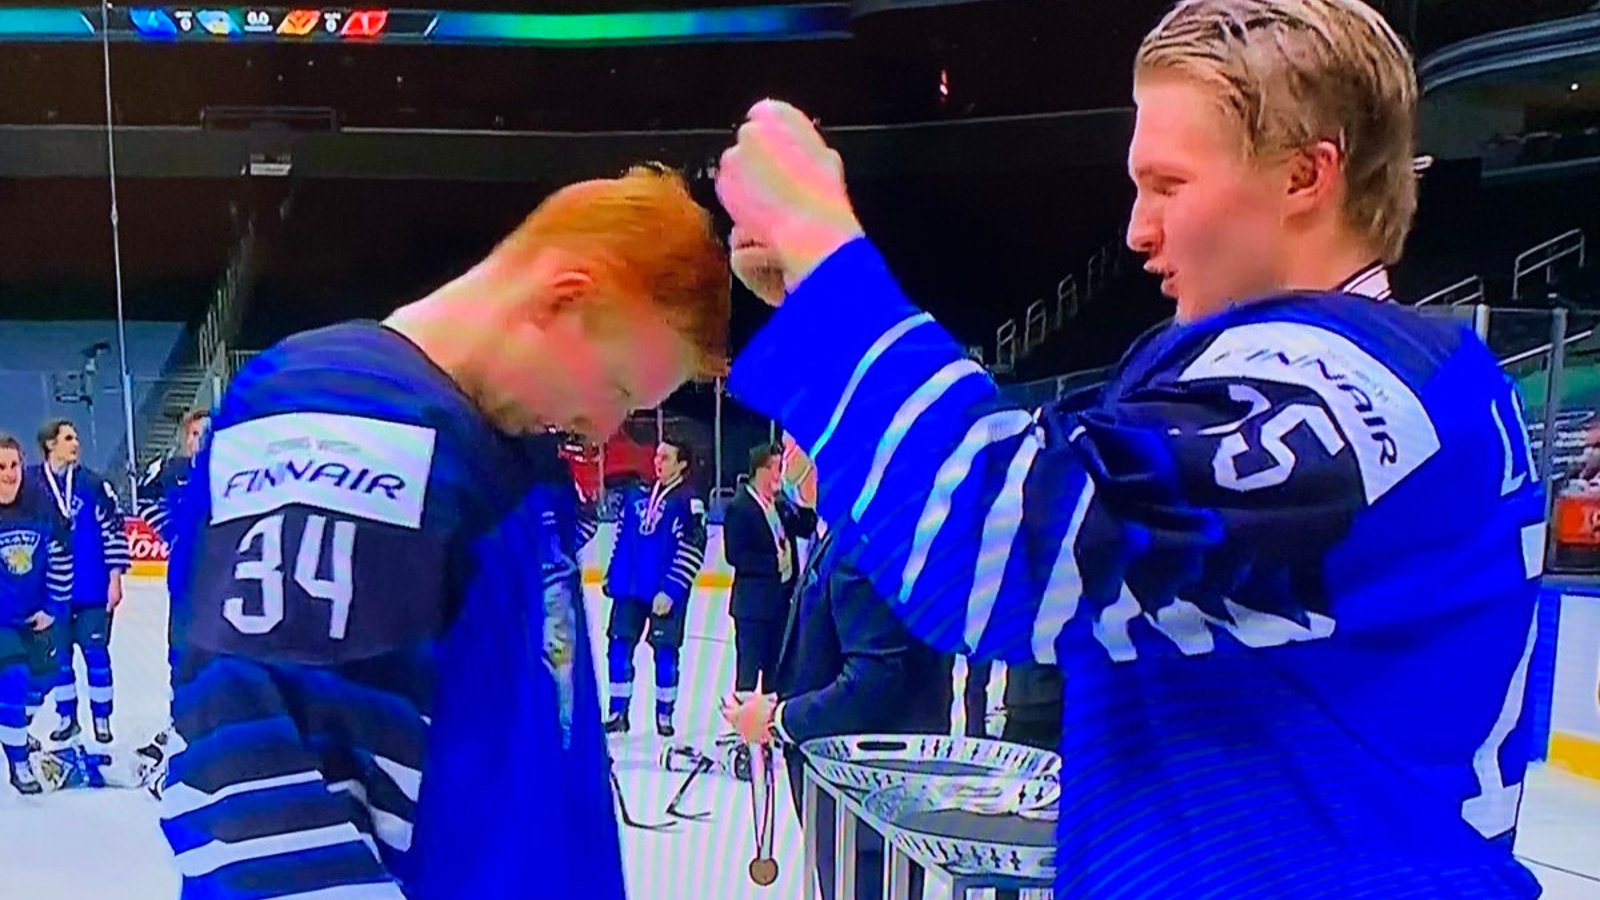 Team Finland forced to receive bronze medal in new touching yet awkward setting 